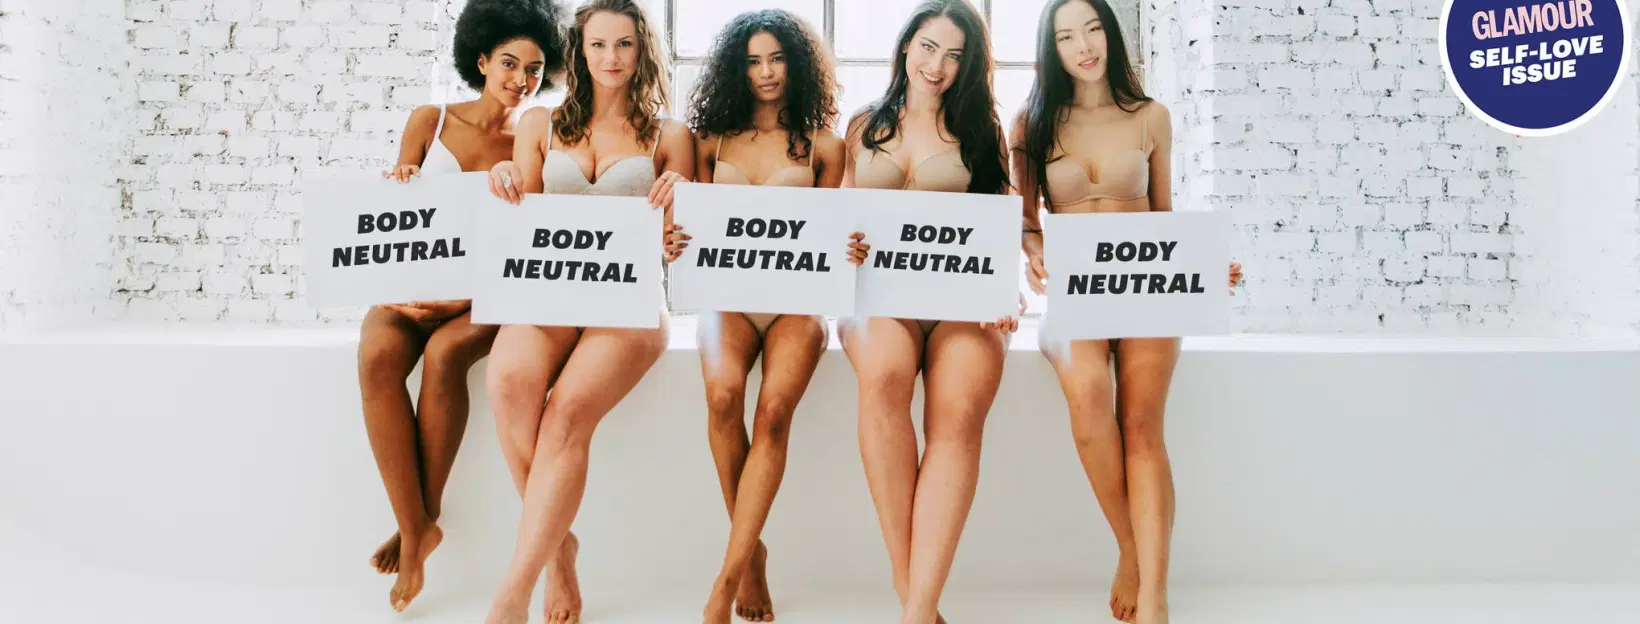 Women standing together in their underwear with signs that say Body Neutral